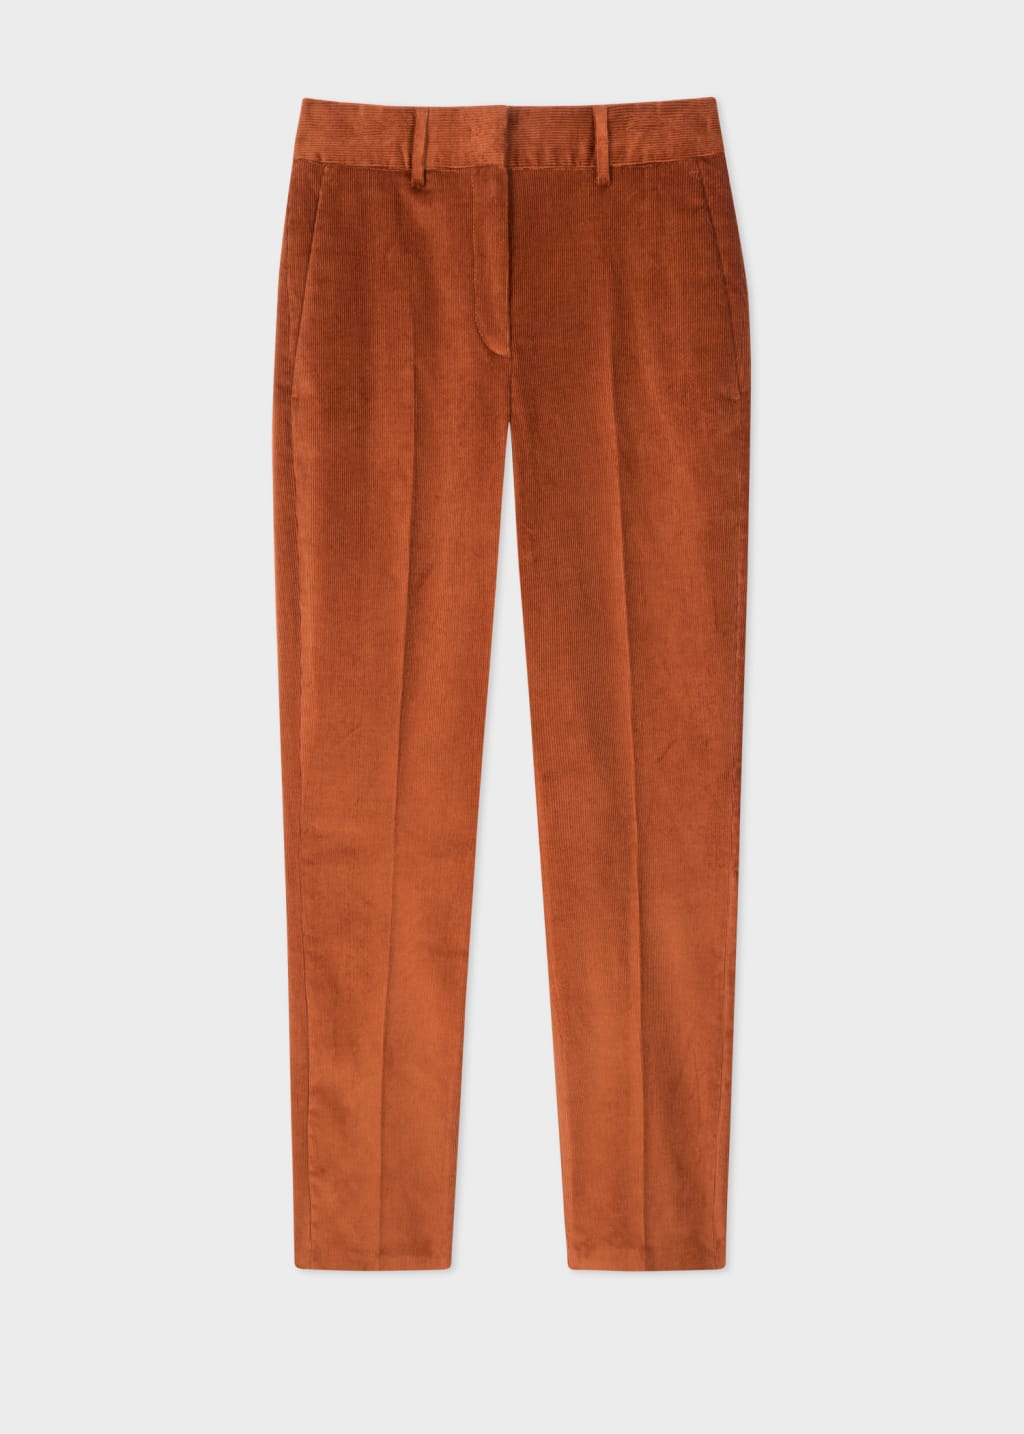 Women's Tapered-Fit Rust Corduroy Trousers